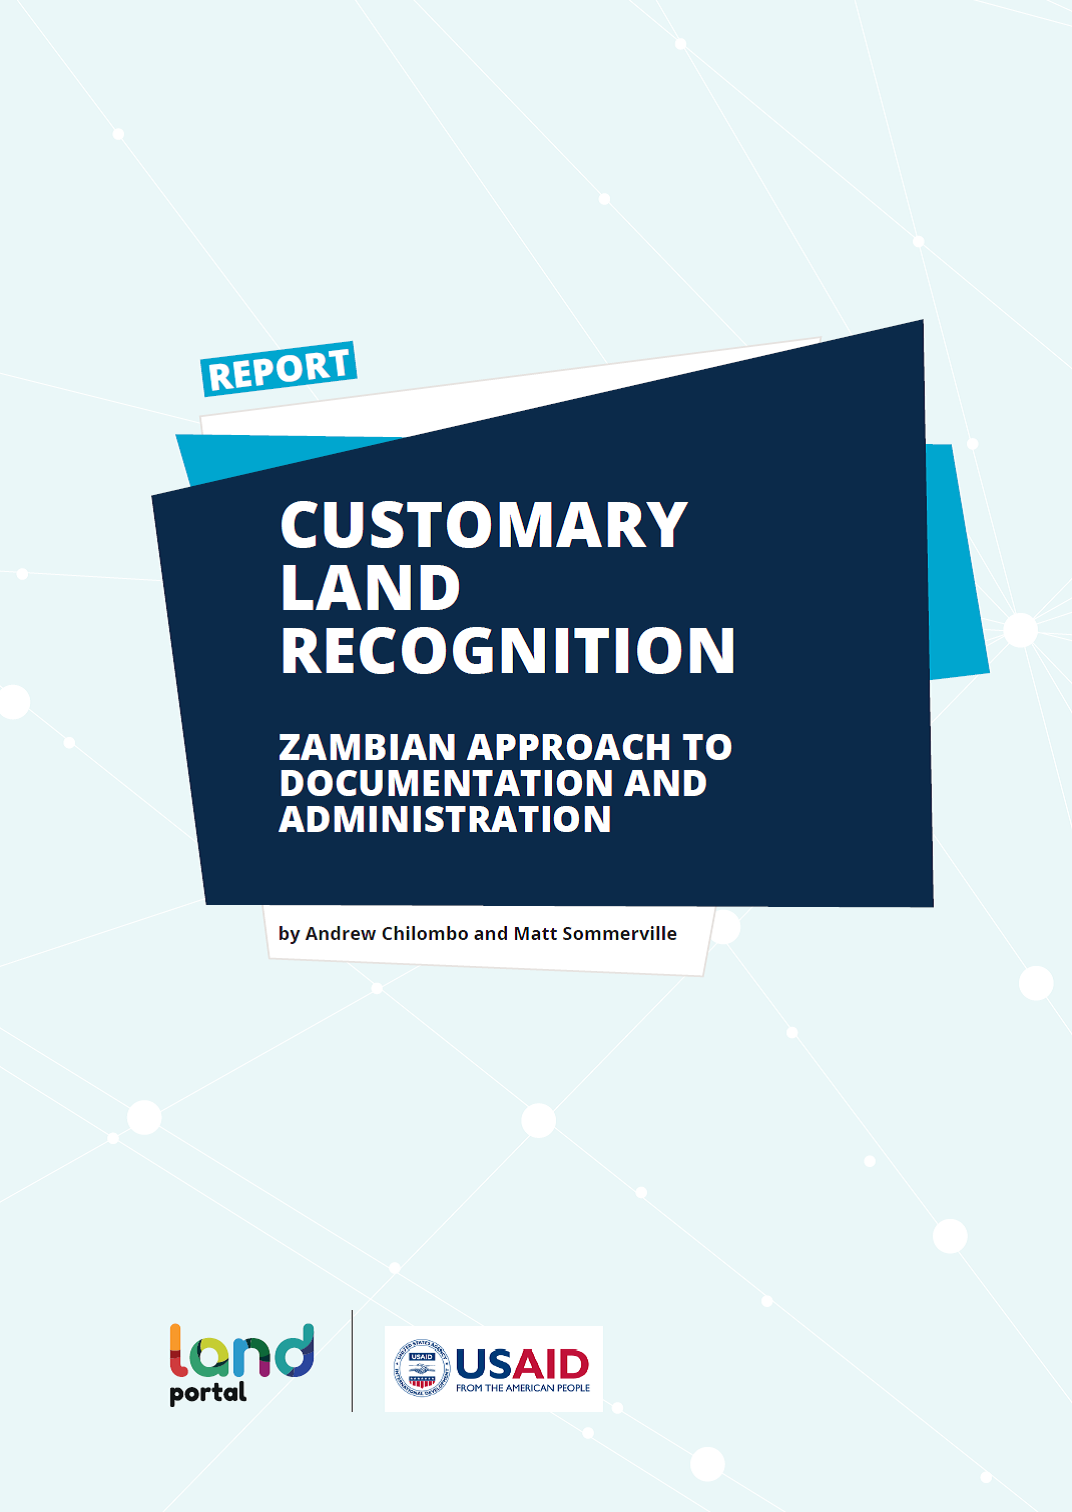 Customary Land Recognition in Zambia